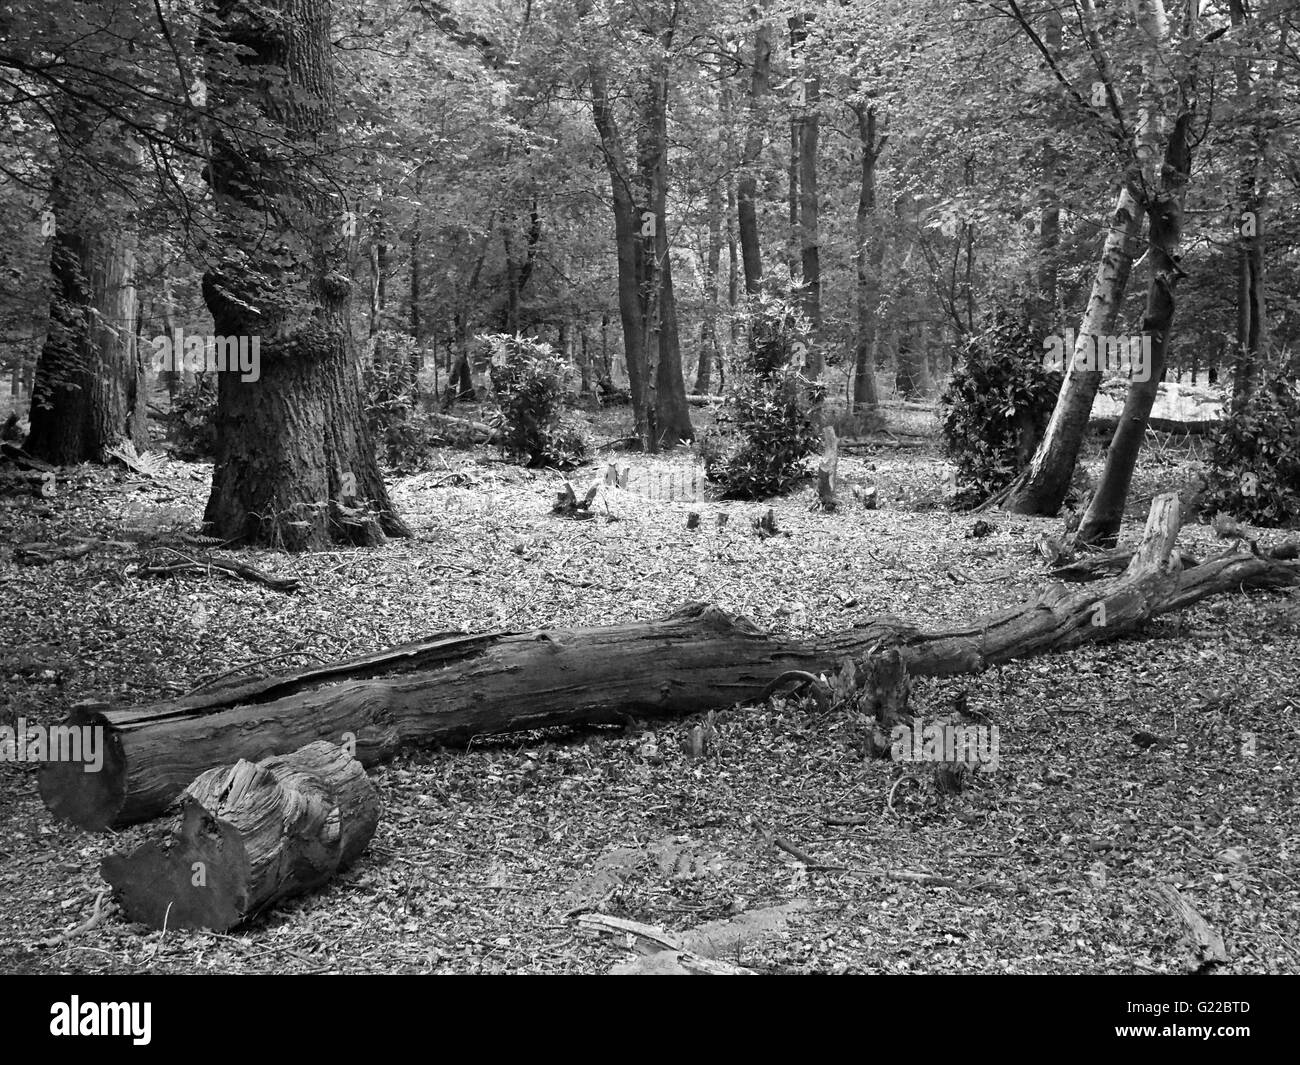 Fallen tree in the woods, captured in black and white Stock Photo